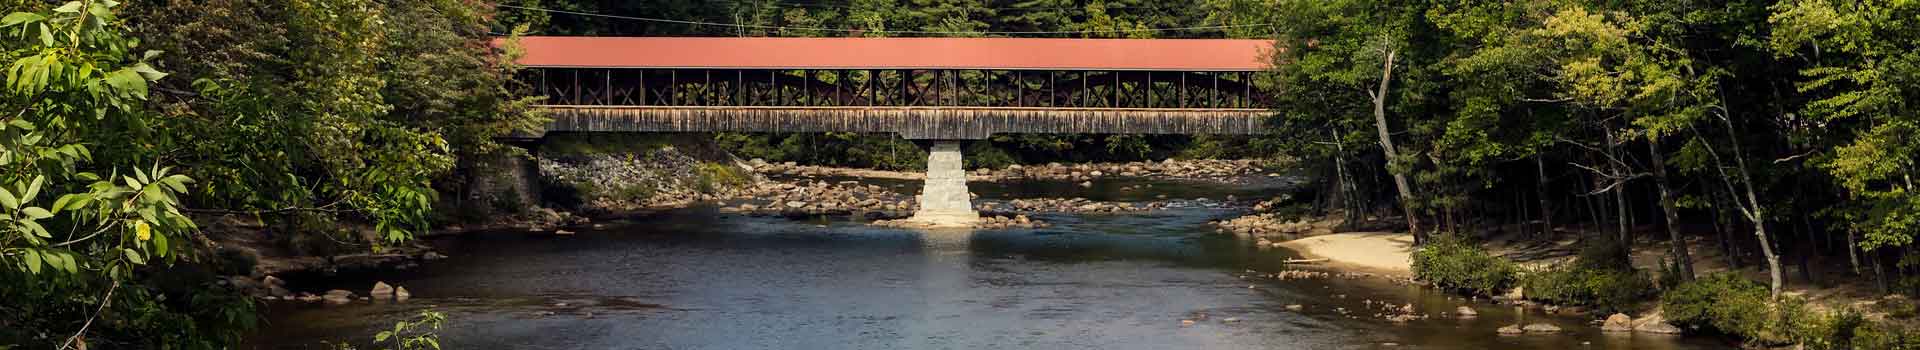 Covered Bridge with river